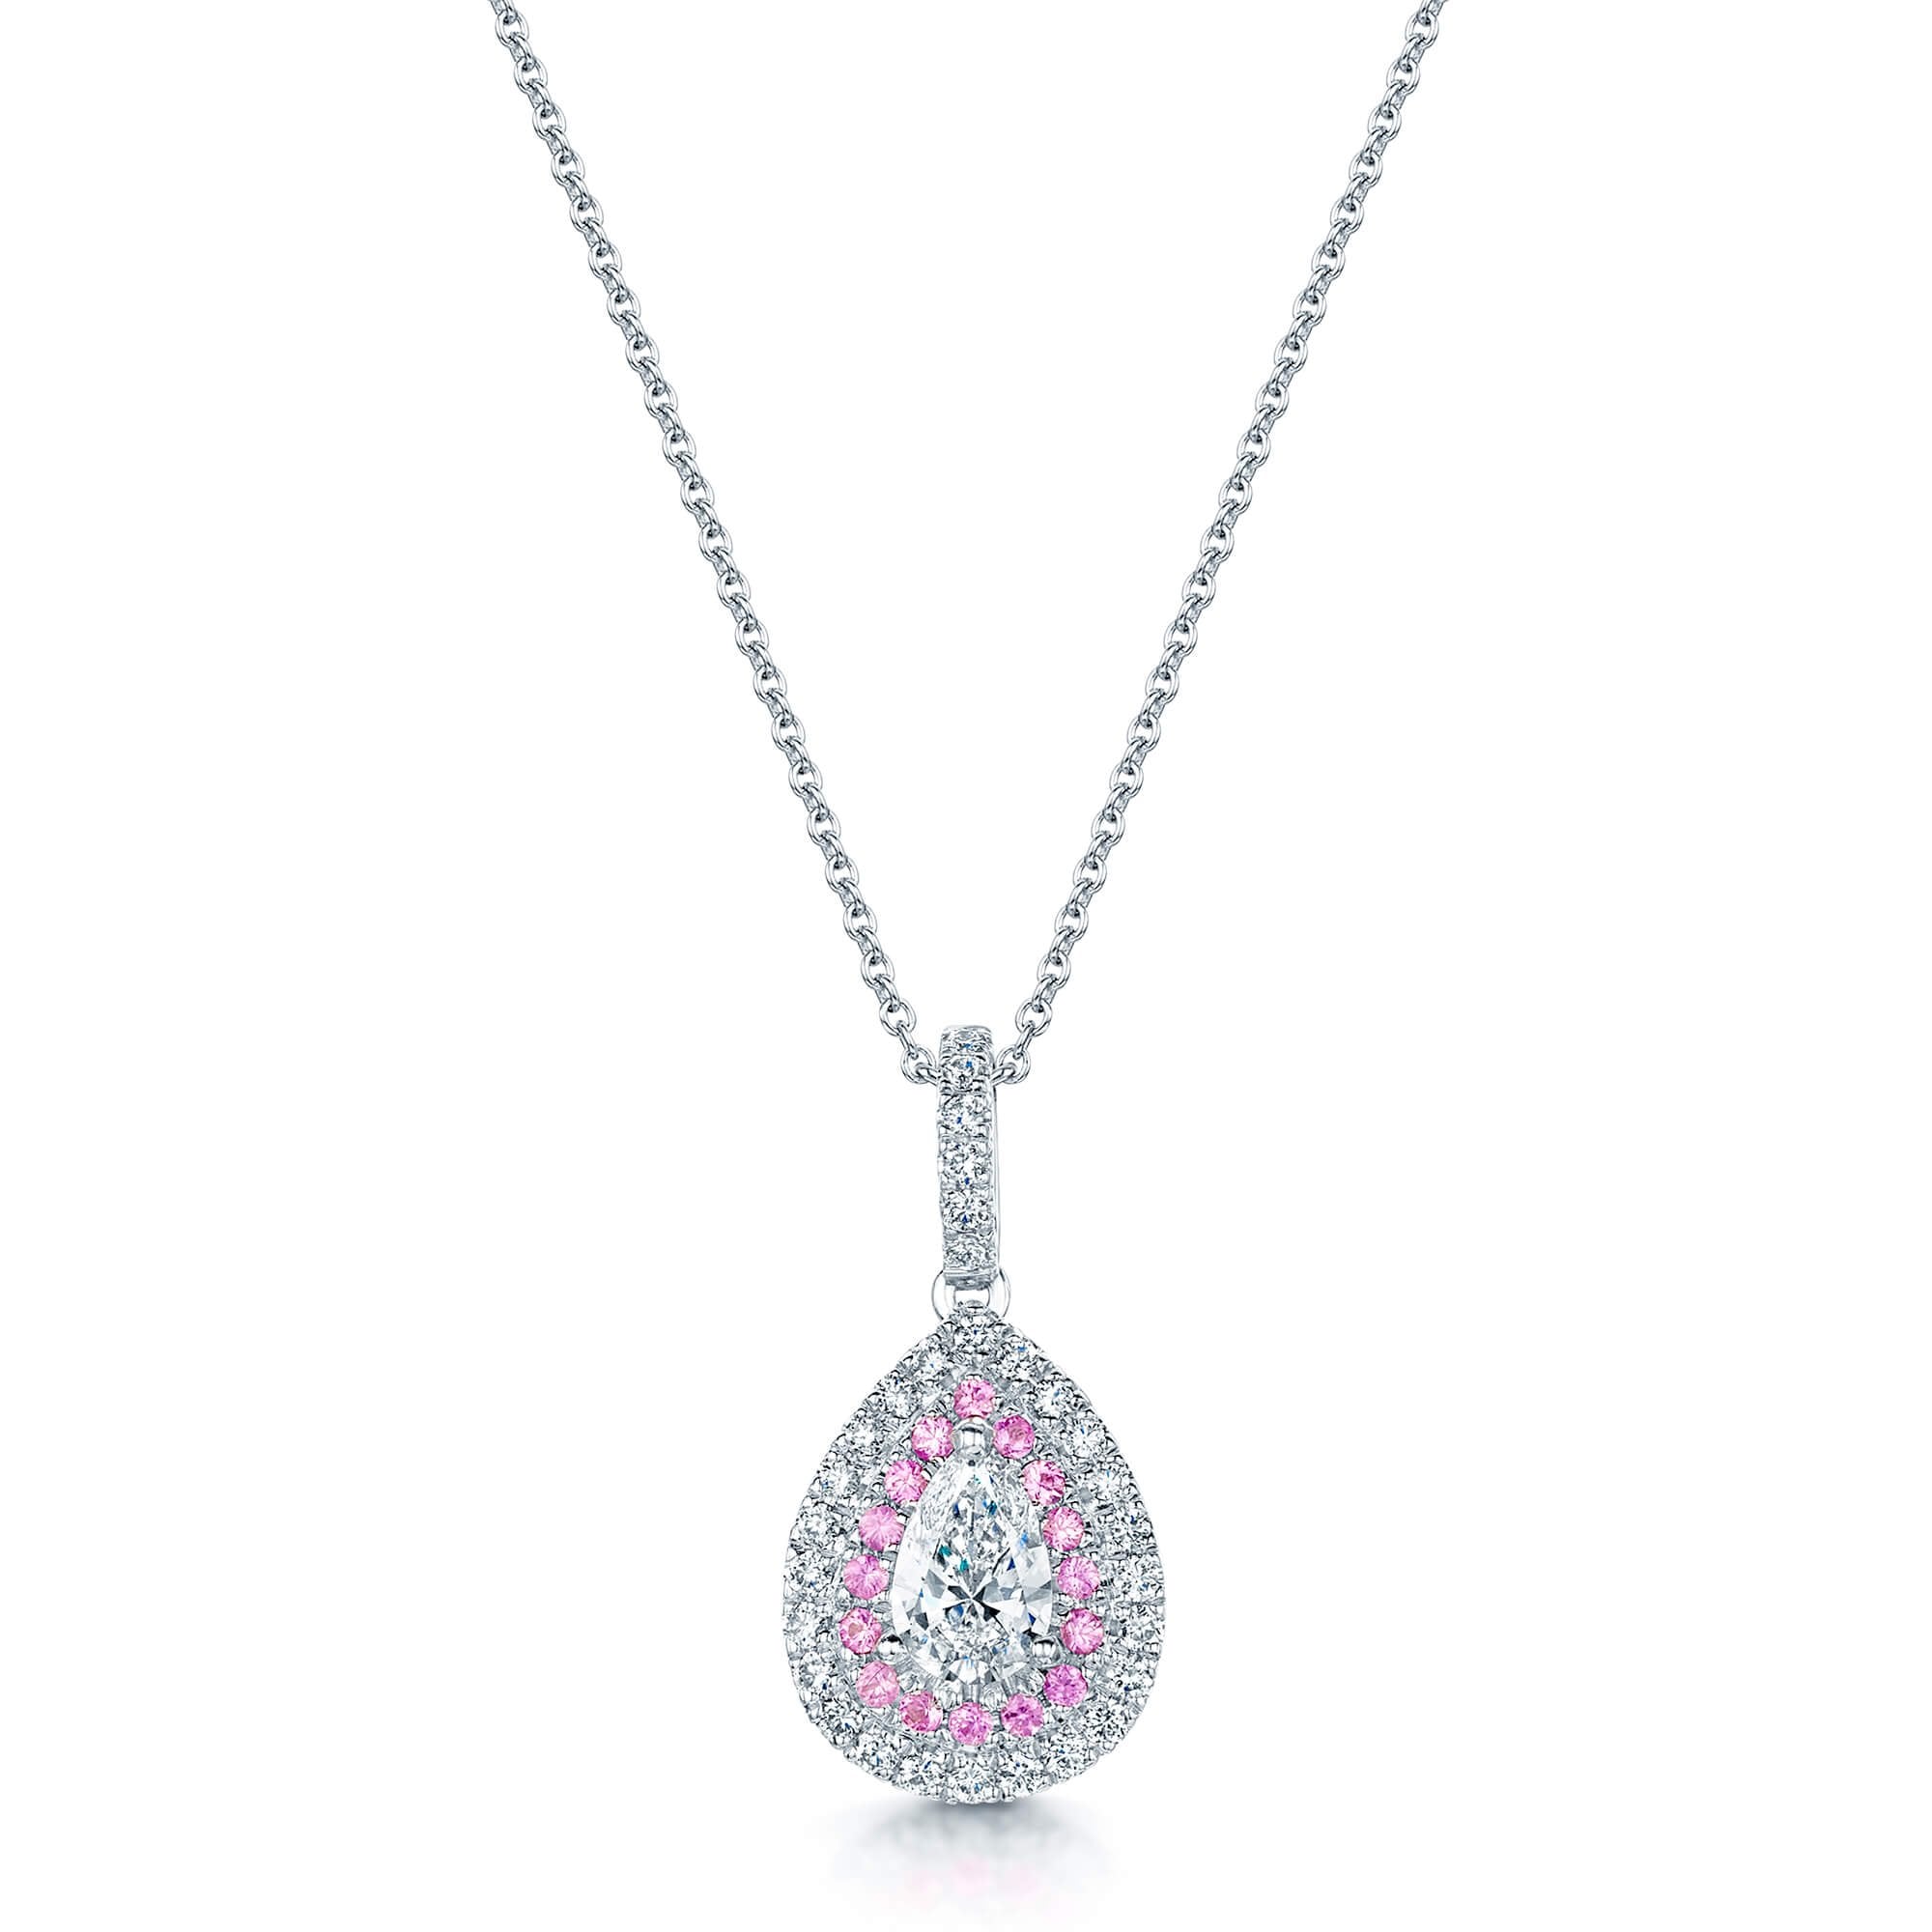 18ct White Gold Pear Cut Diamond and Pink Sapphire Pendant with Double Halo Surround